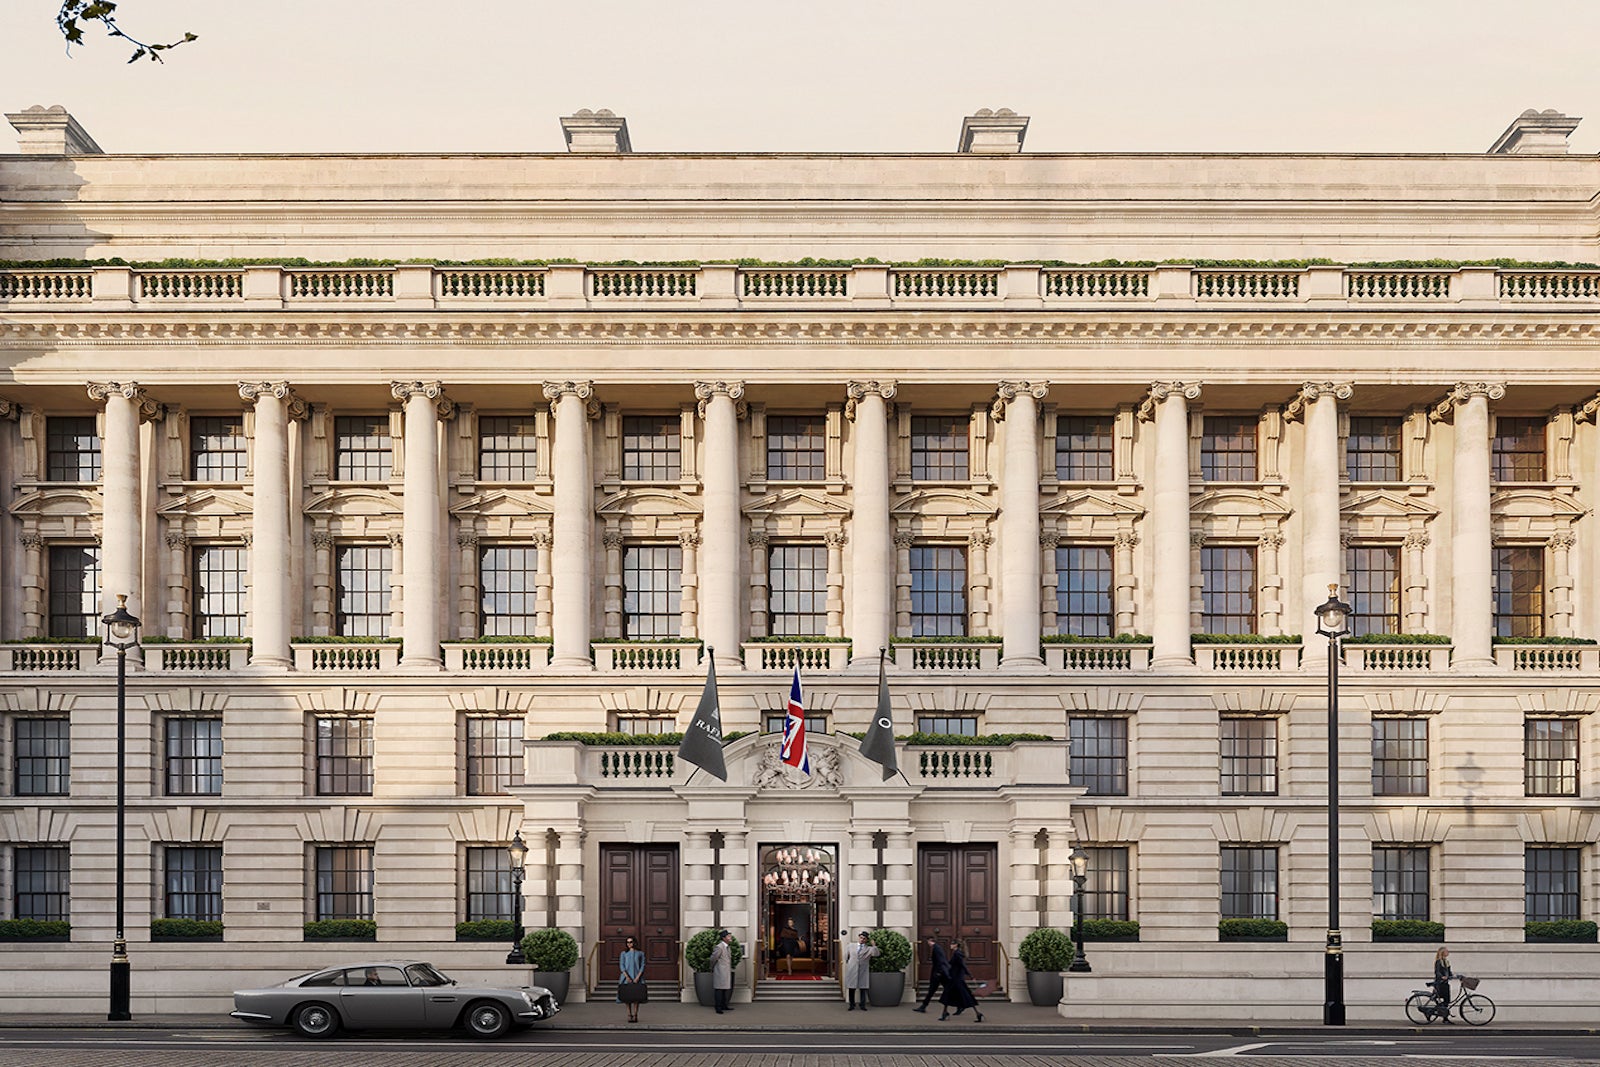 rendering of old British building with columns and car out front